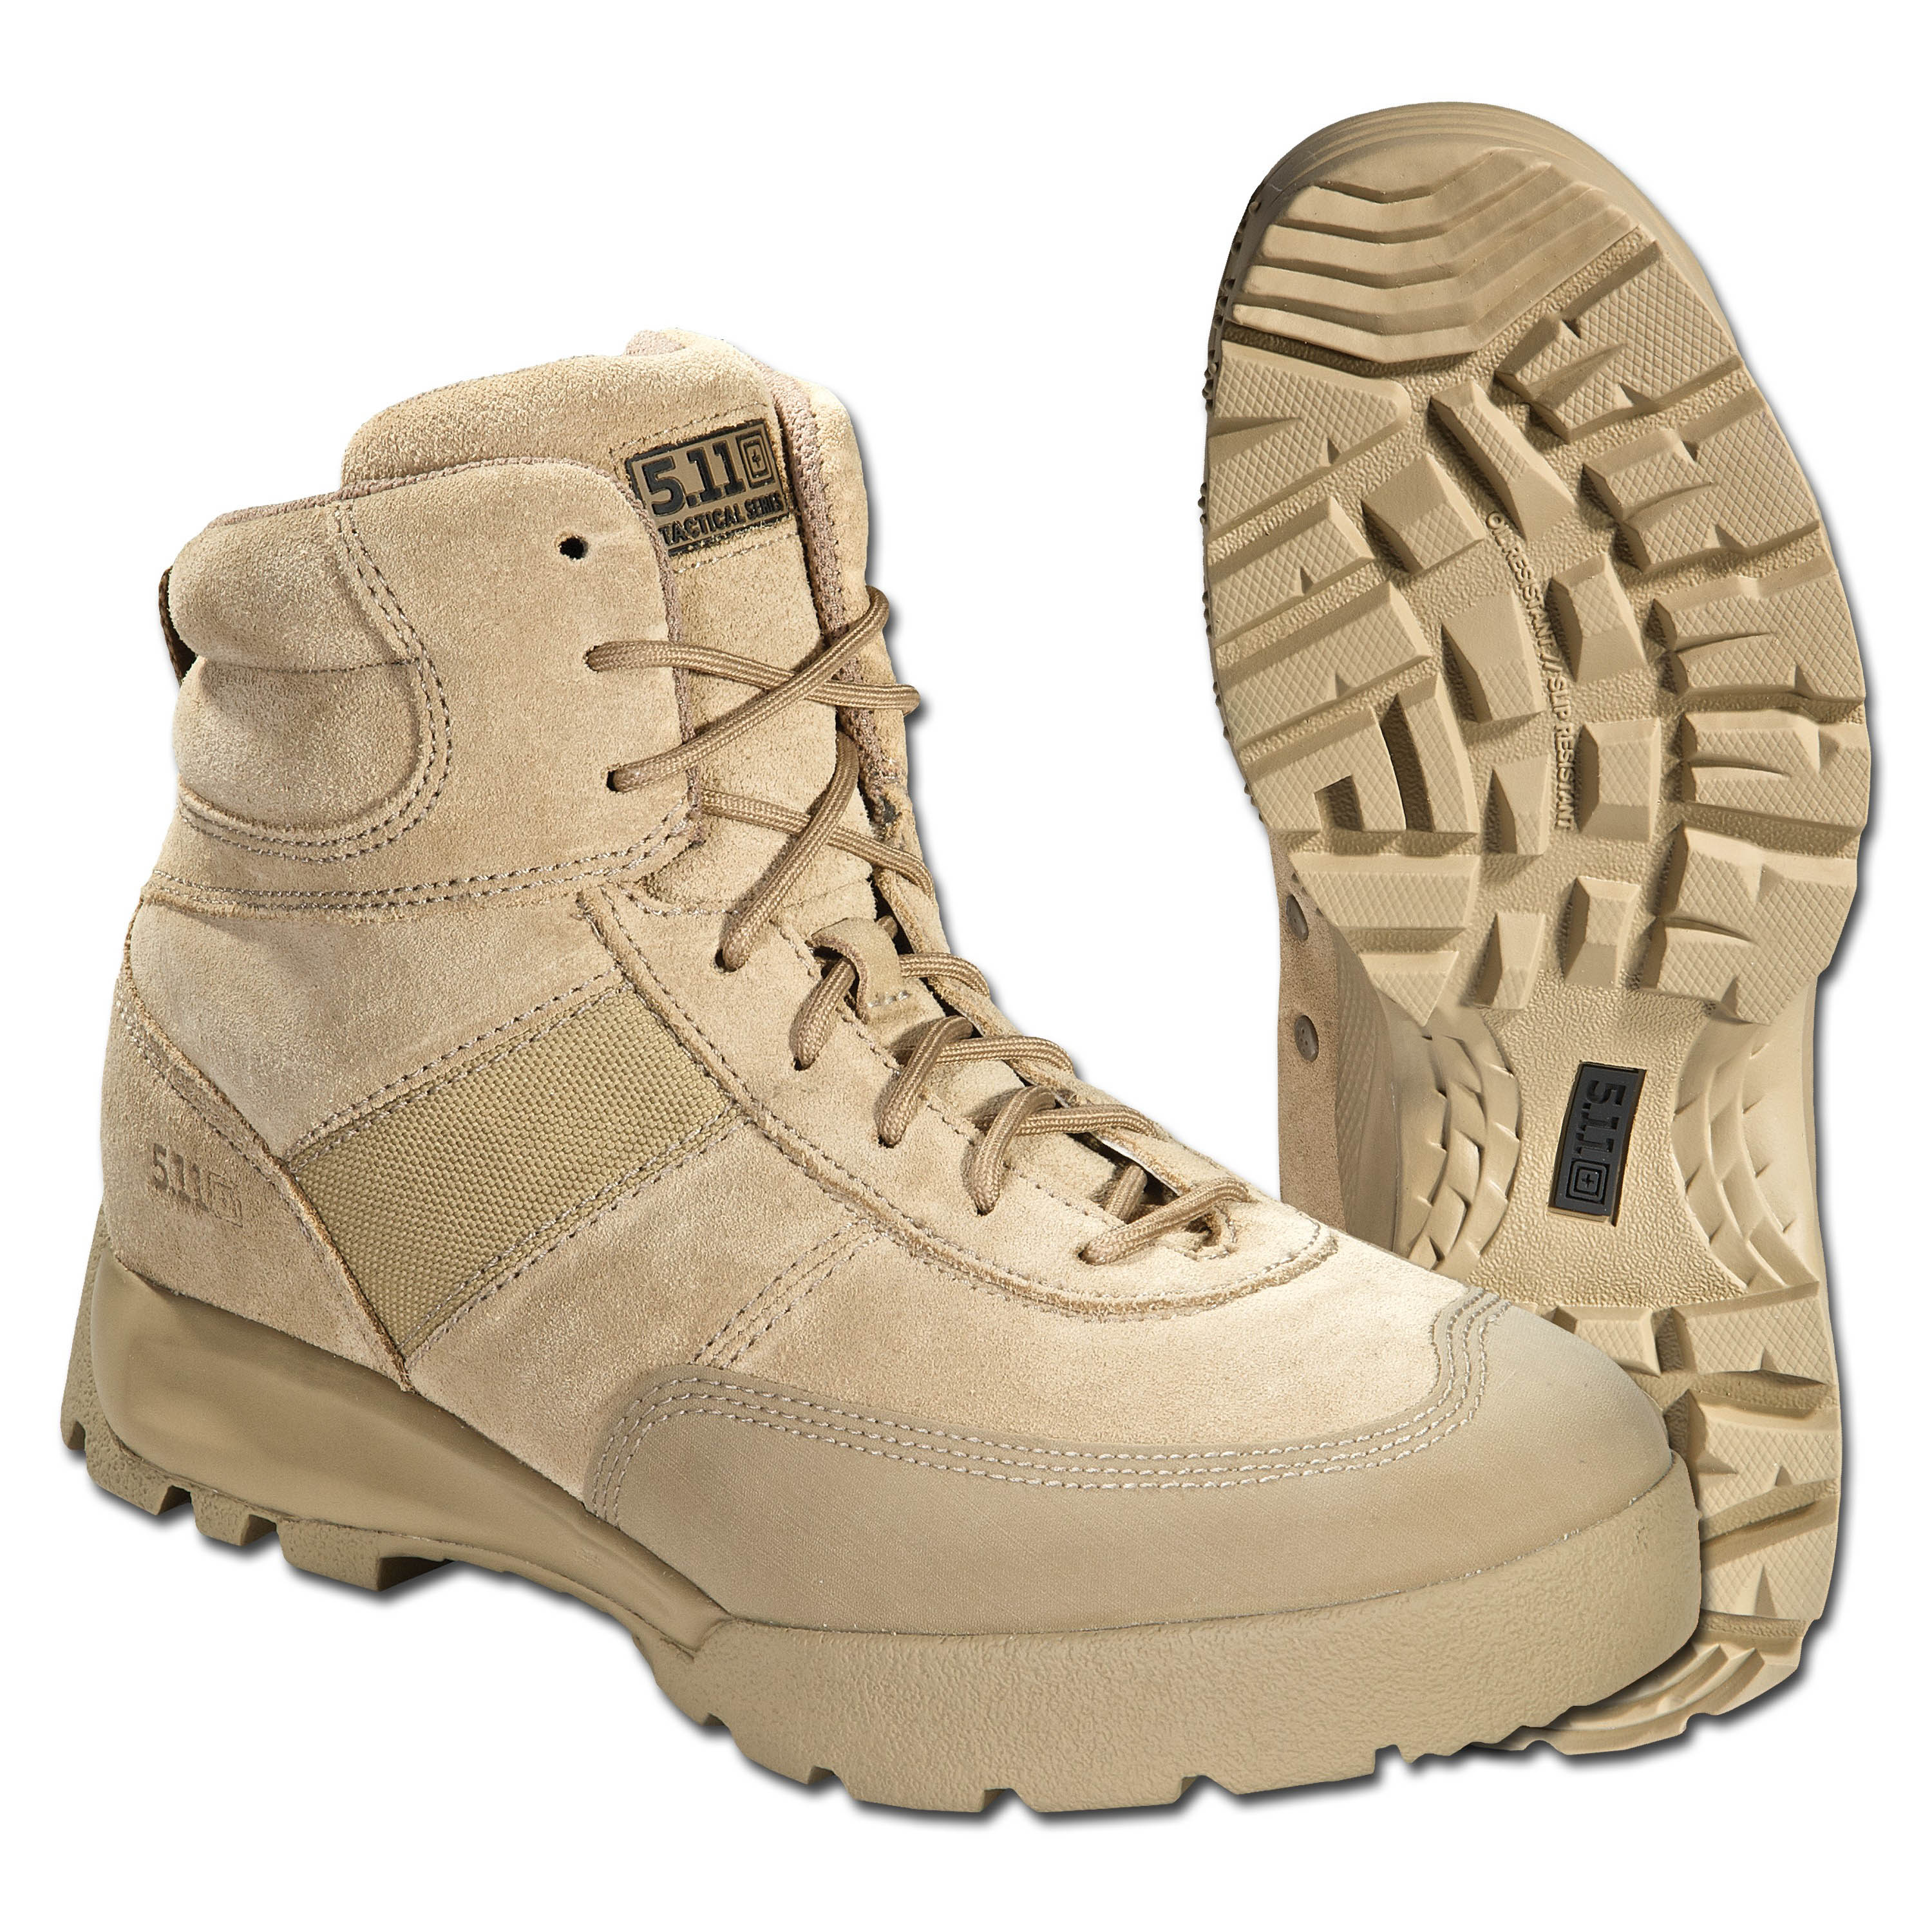 5.11 Advance Boots, coyote | 5.11 Advance Boots, coyote | Combat Boots ...